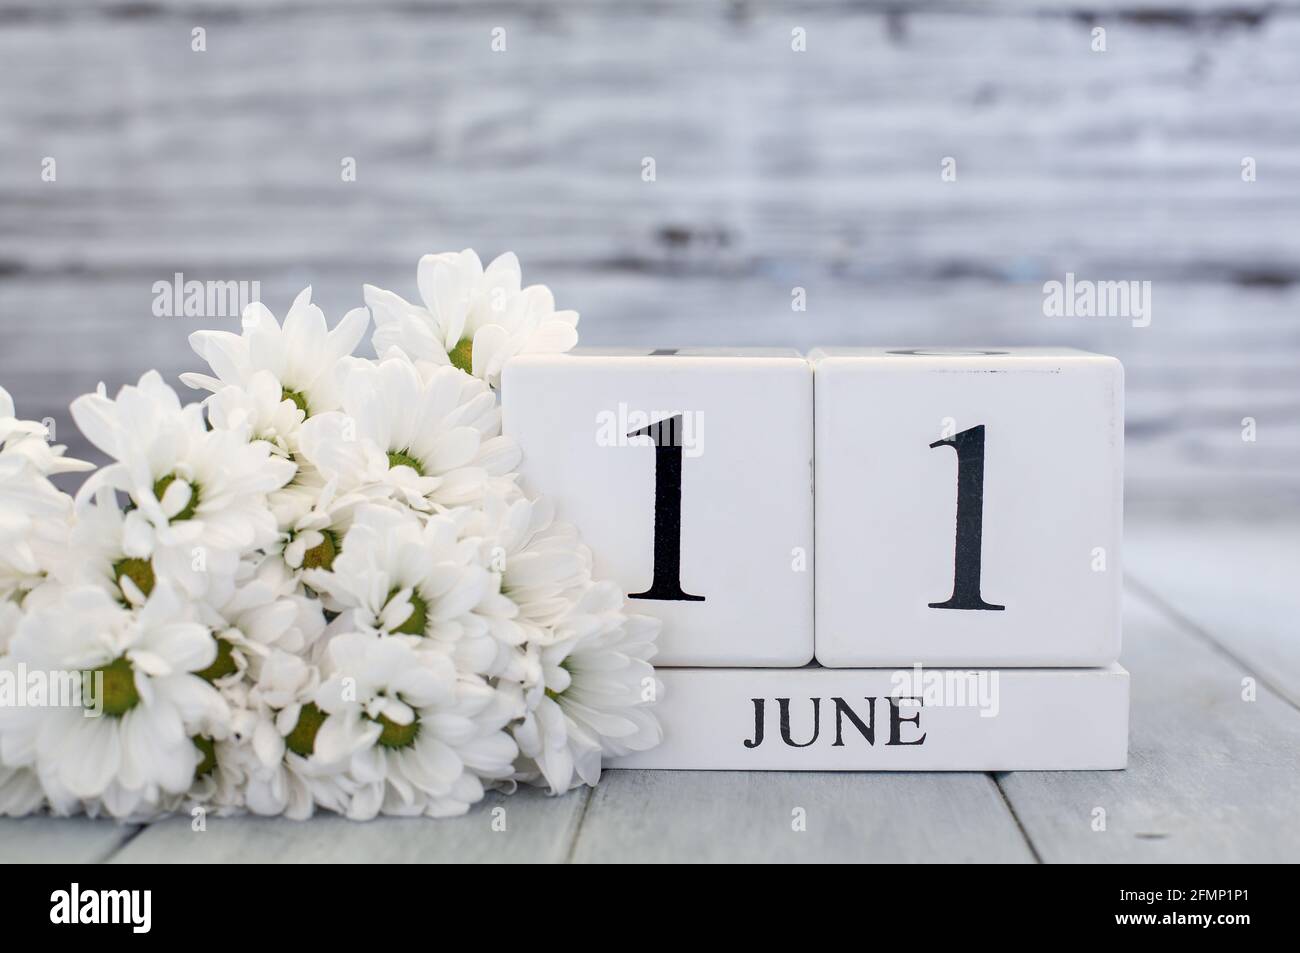 White wood calendar blocks with the date June 11th and white daisies. Selective focus with blurred background. Stock Photo